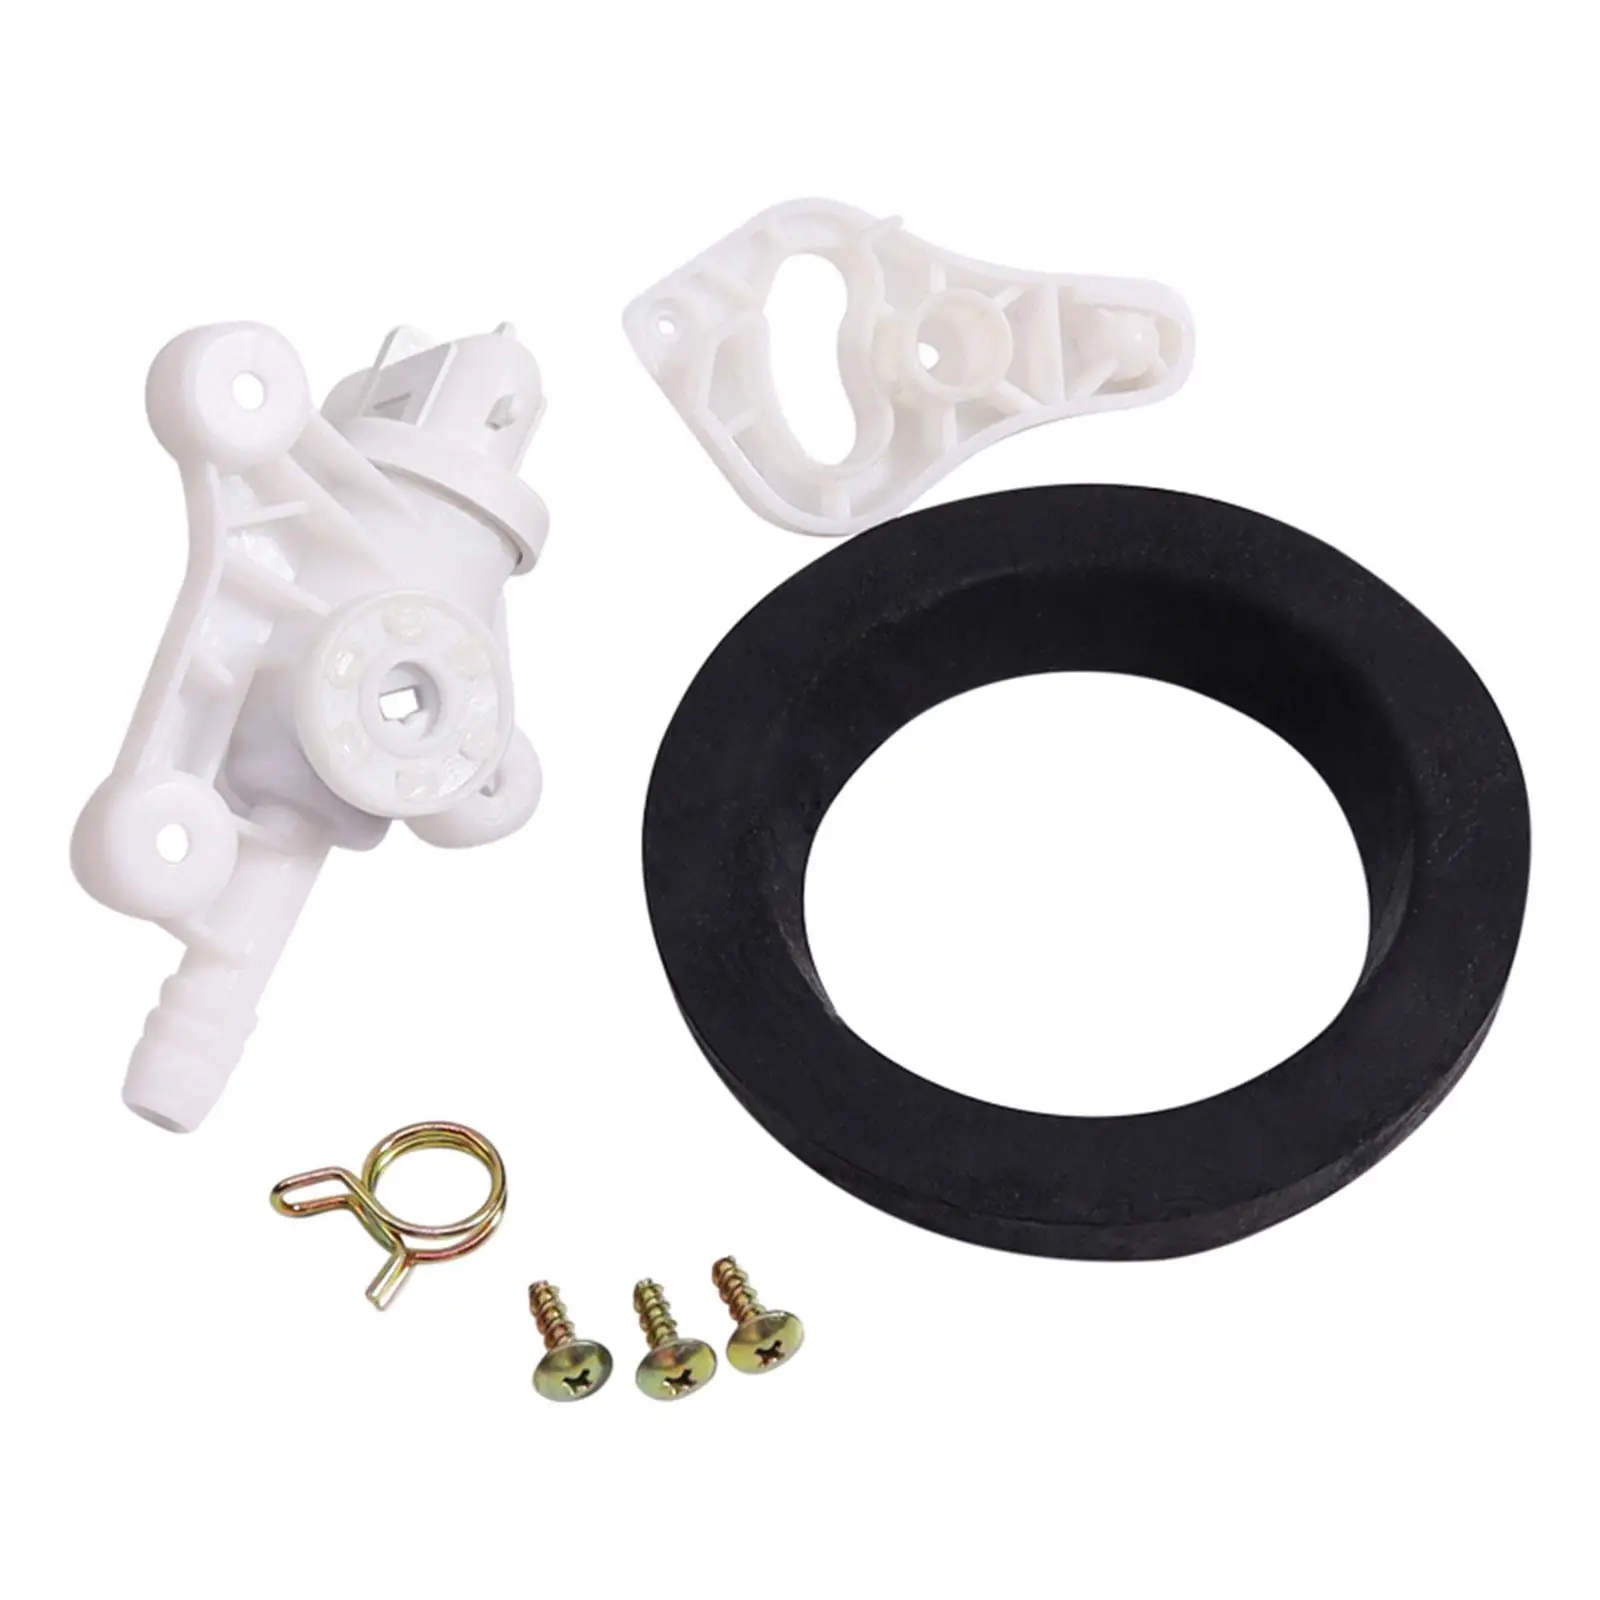 34100 Water Valve with Seal for Style Plus Toilets RV Toilet Valve with RV ball Seal Replace Parts for Durable